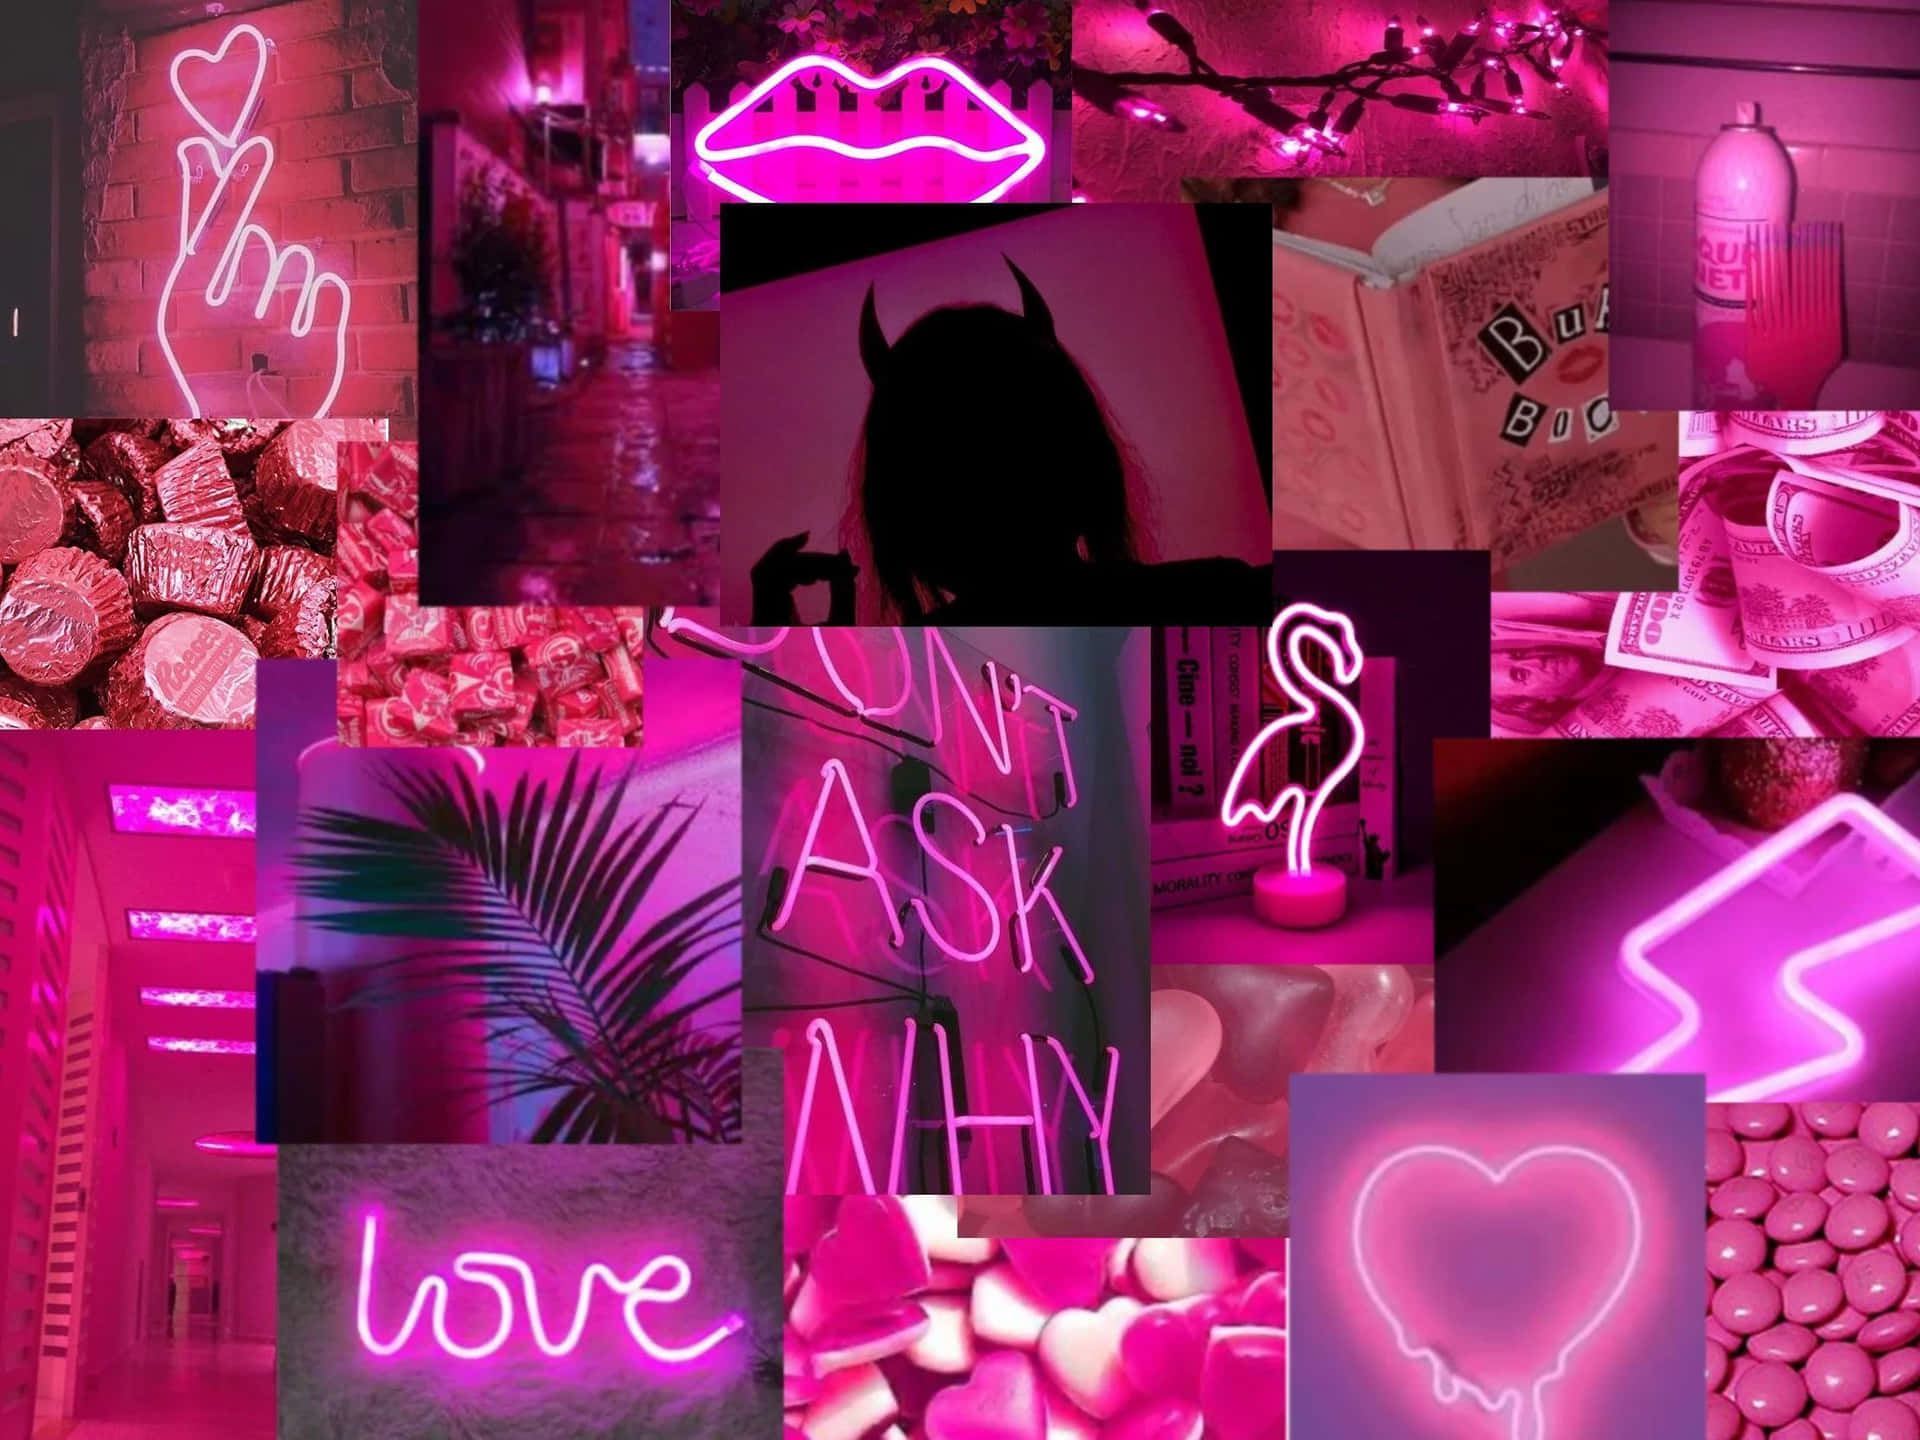 A vibrancy of soft Neon Pink lighting